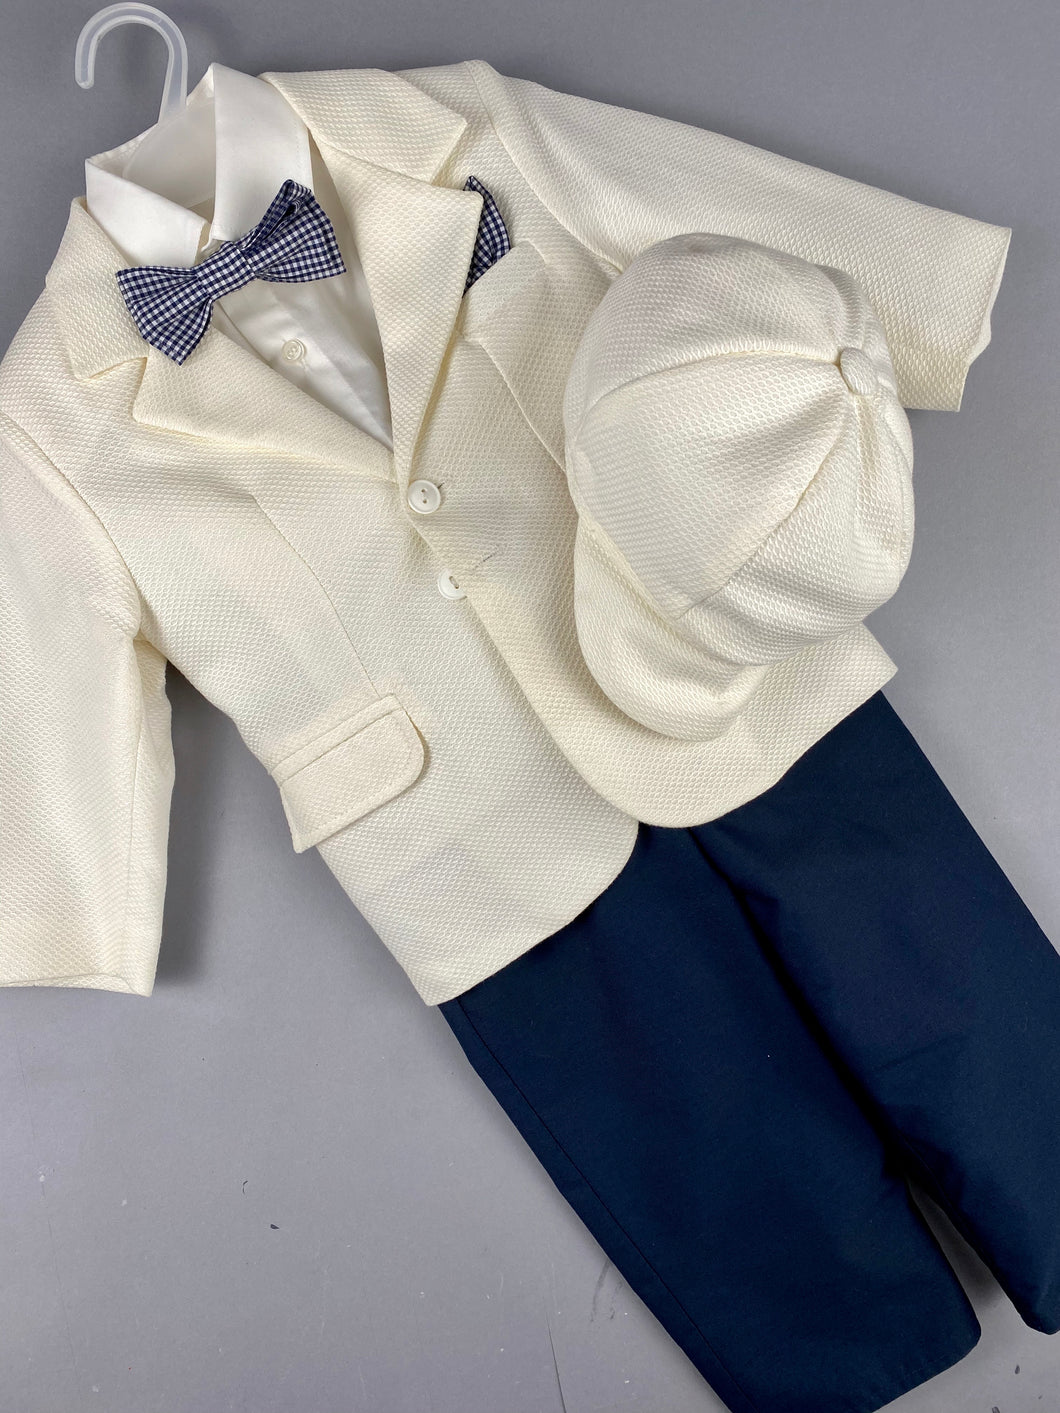 Rosies Collections 6pc full suit, Dress shirt with cuff sleeves, Pants, Jacket, Belt or Suspenders, Cap. Made in Greece exclusively for Rosies Collections S20193